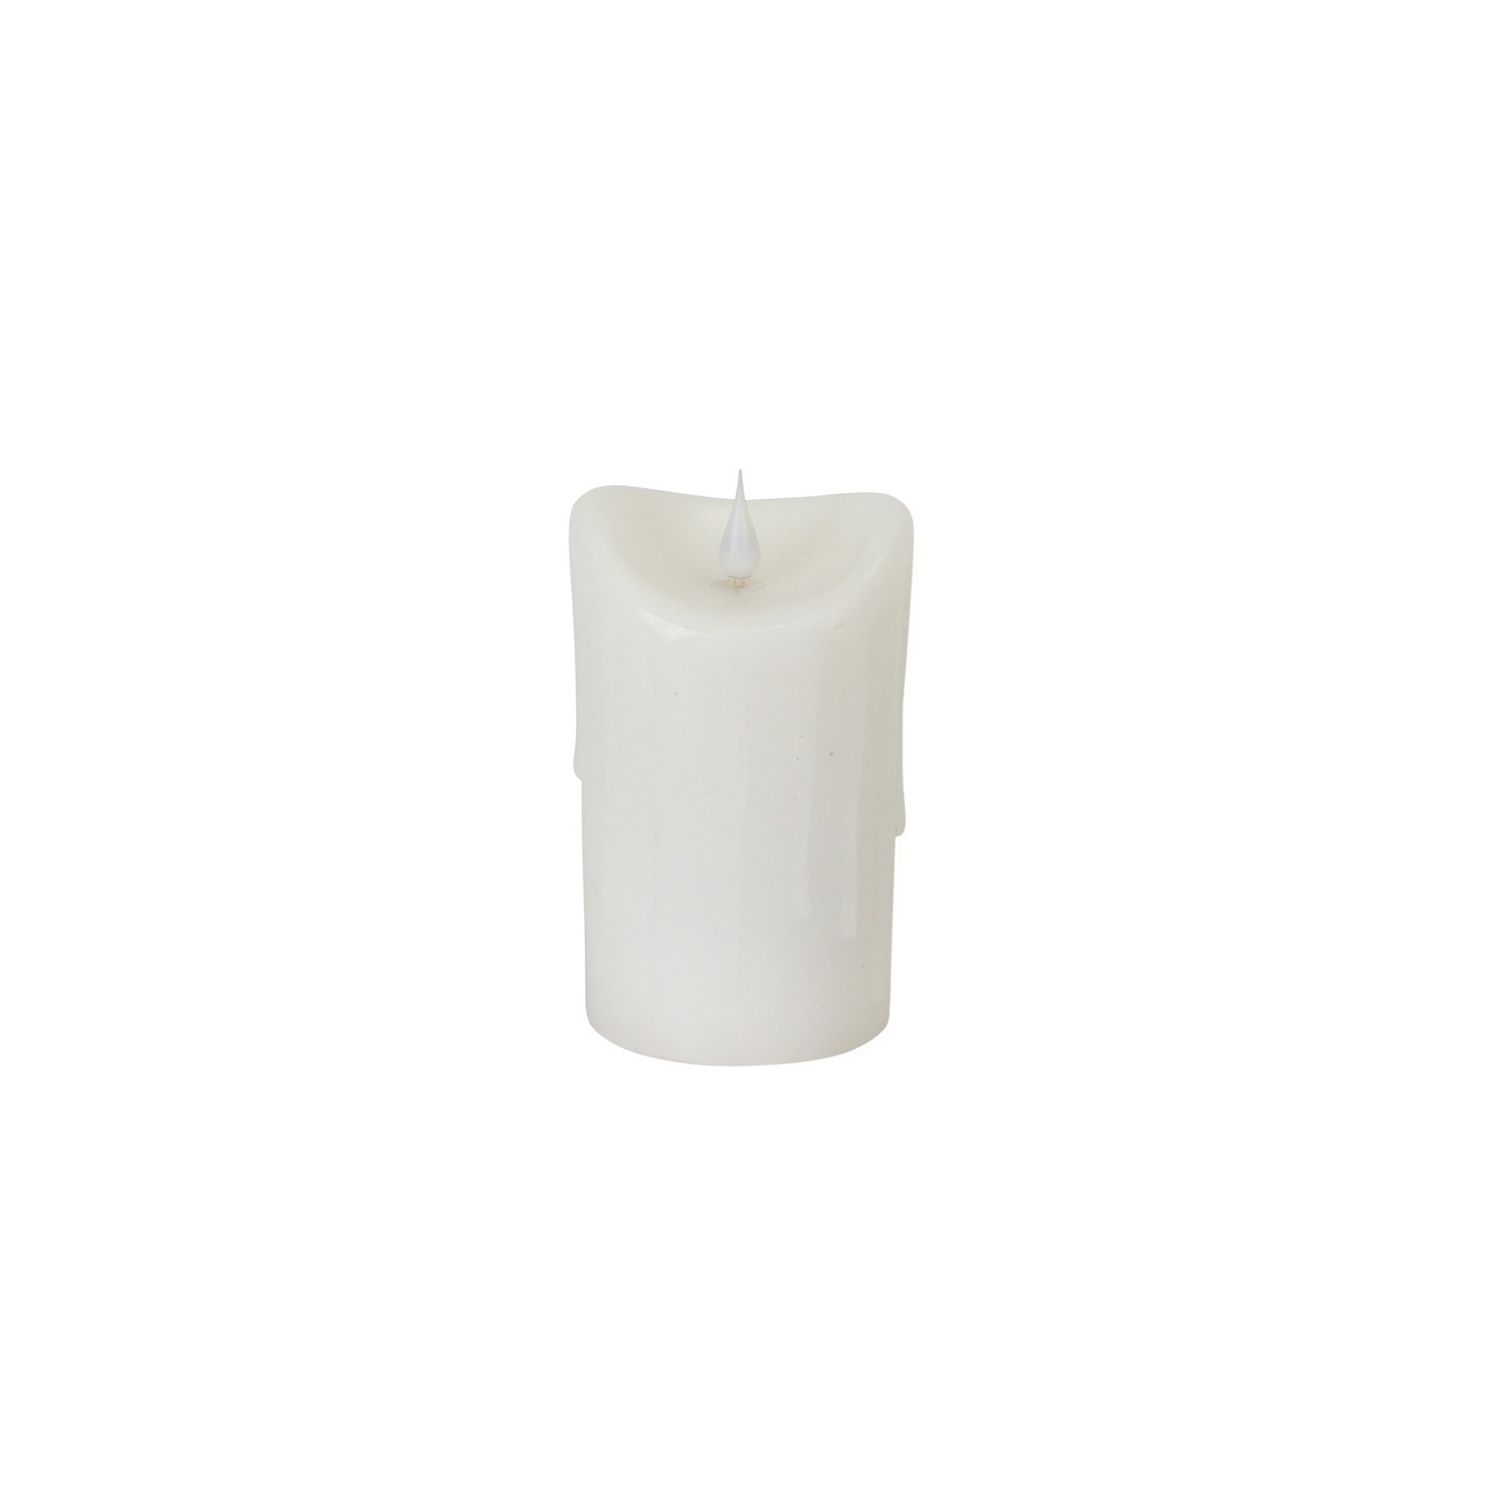 5.25" Pre-Lit White Battery Operated Dripping Flameless LED Pillar Candle